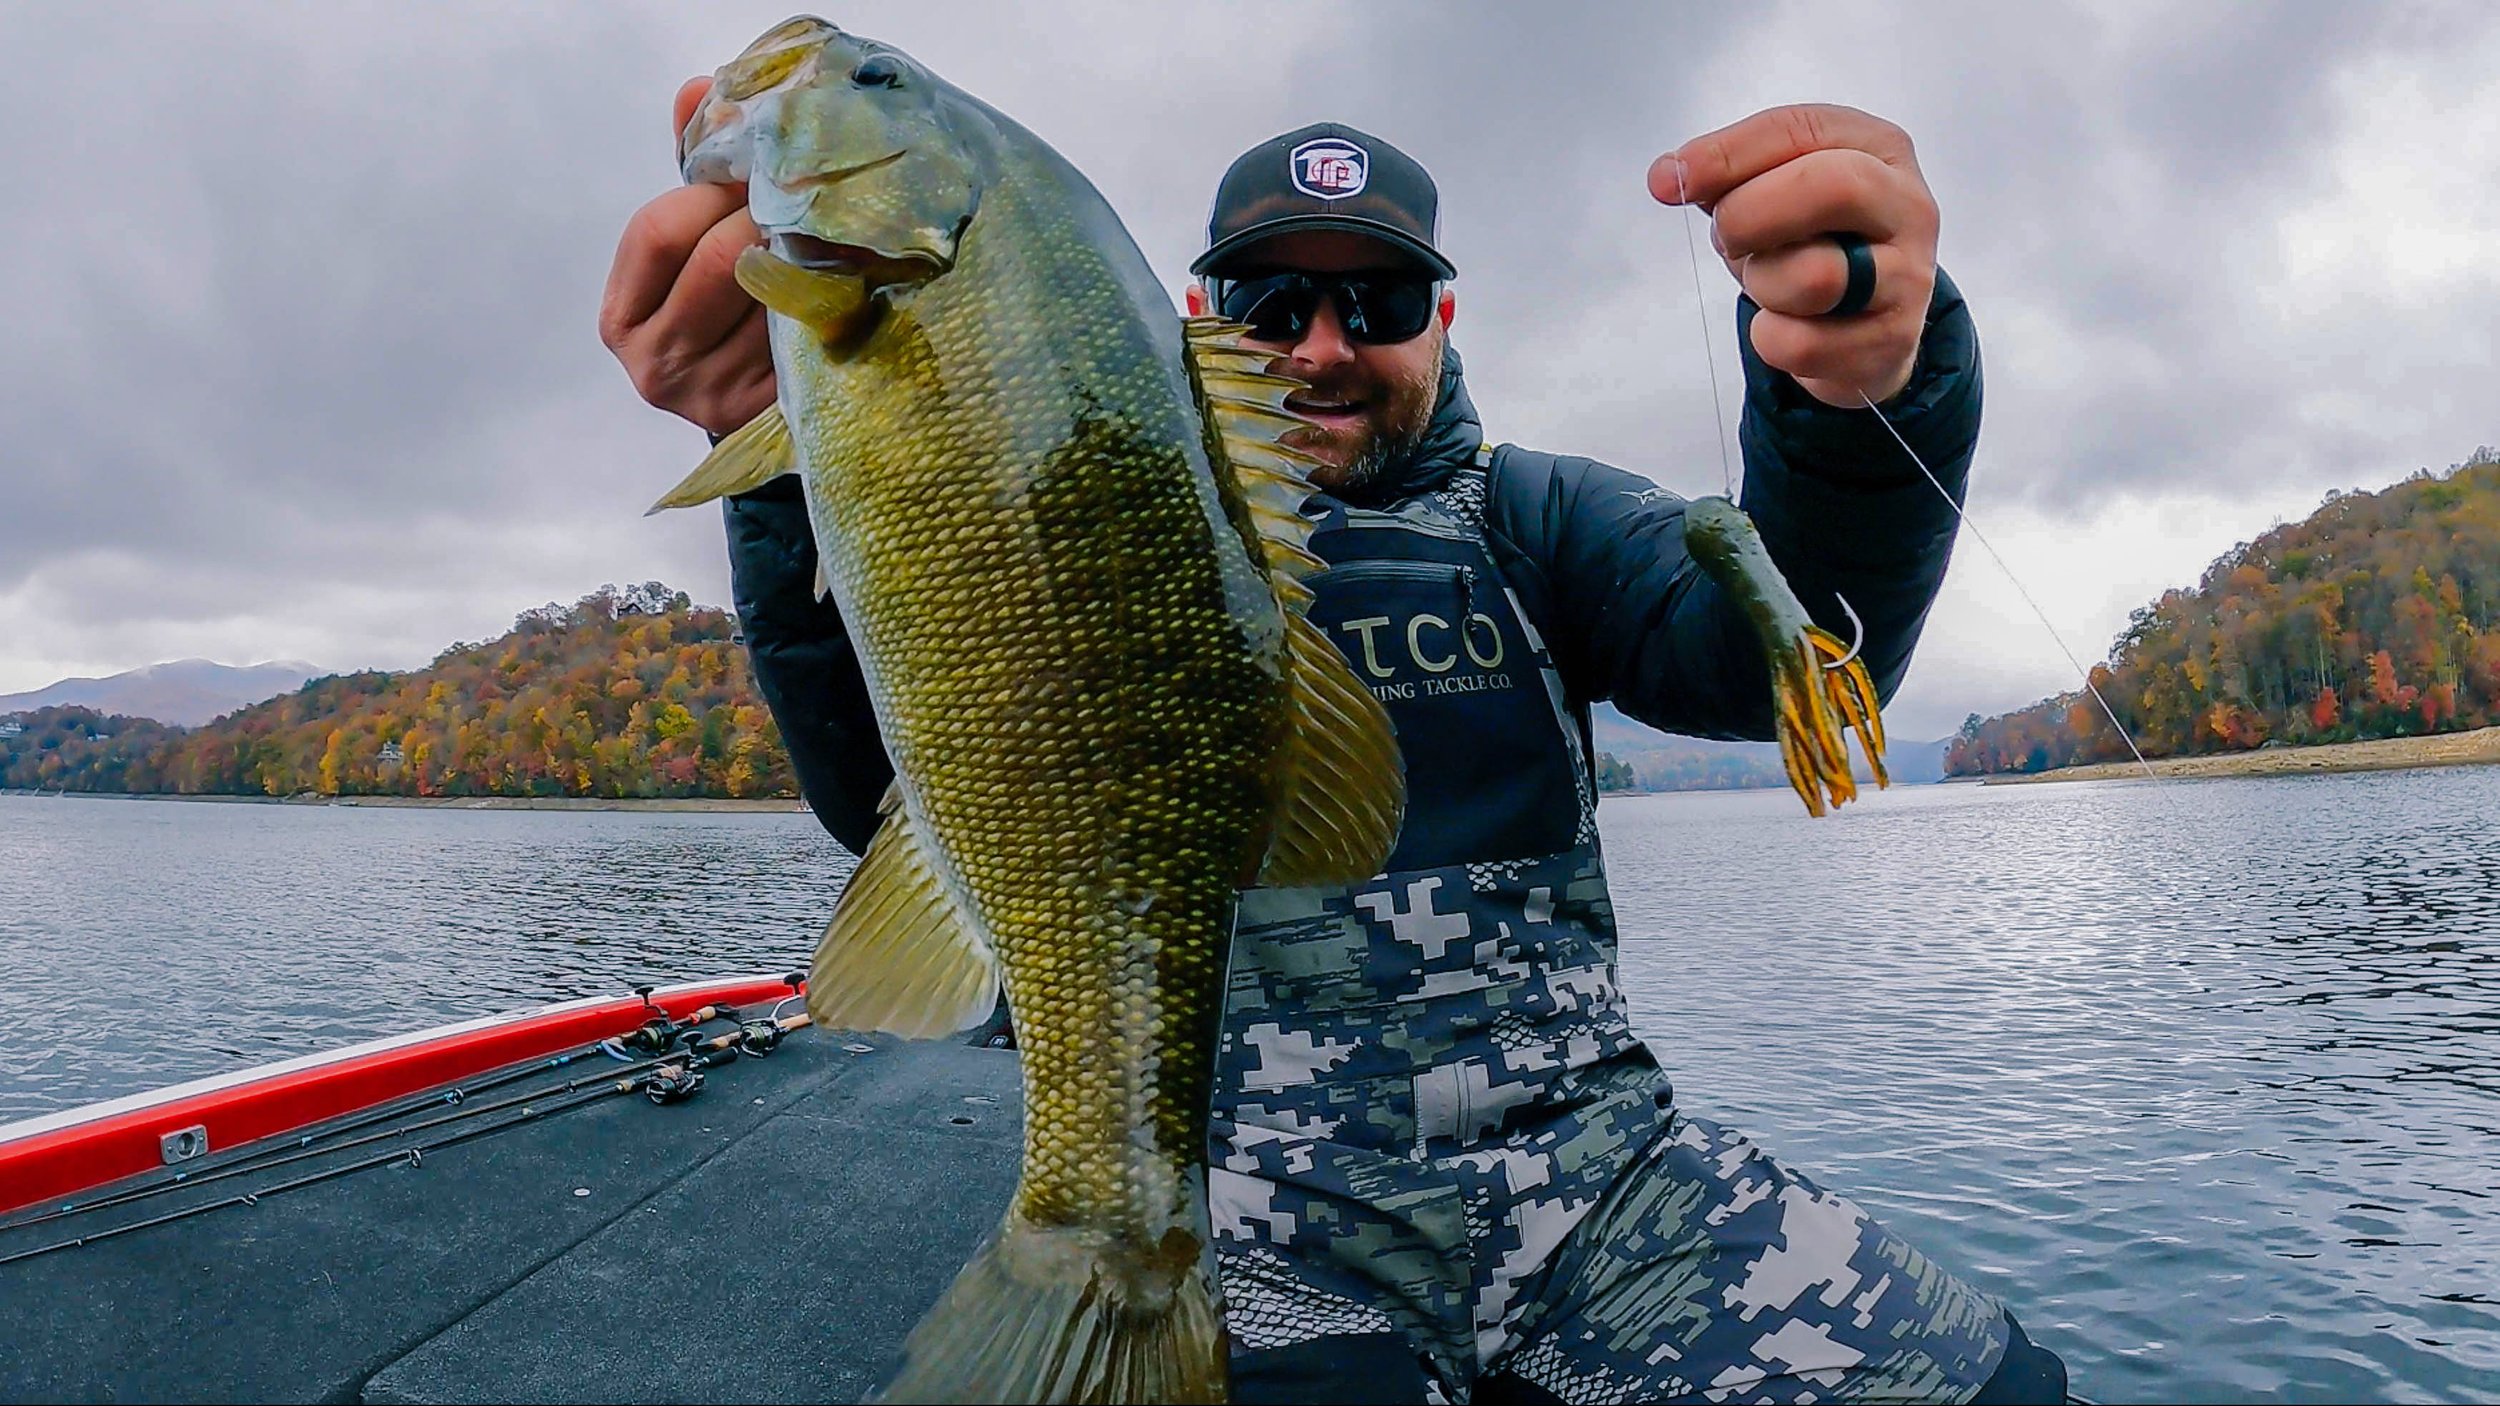 Swim Jigs and Swimbaits - Beginner To Advanced Tricks To Catch More Bass! —  Tactical Bassin' - Bass Fishing Blog